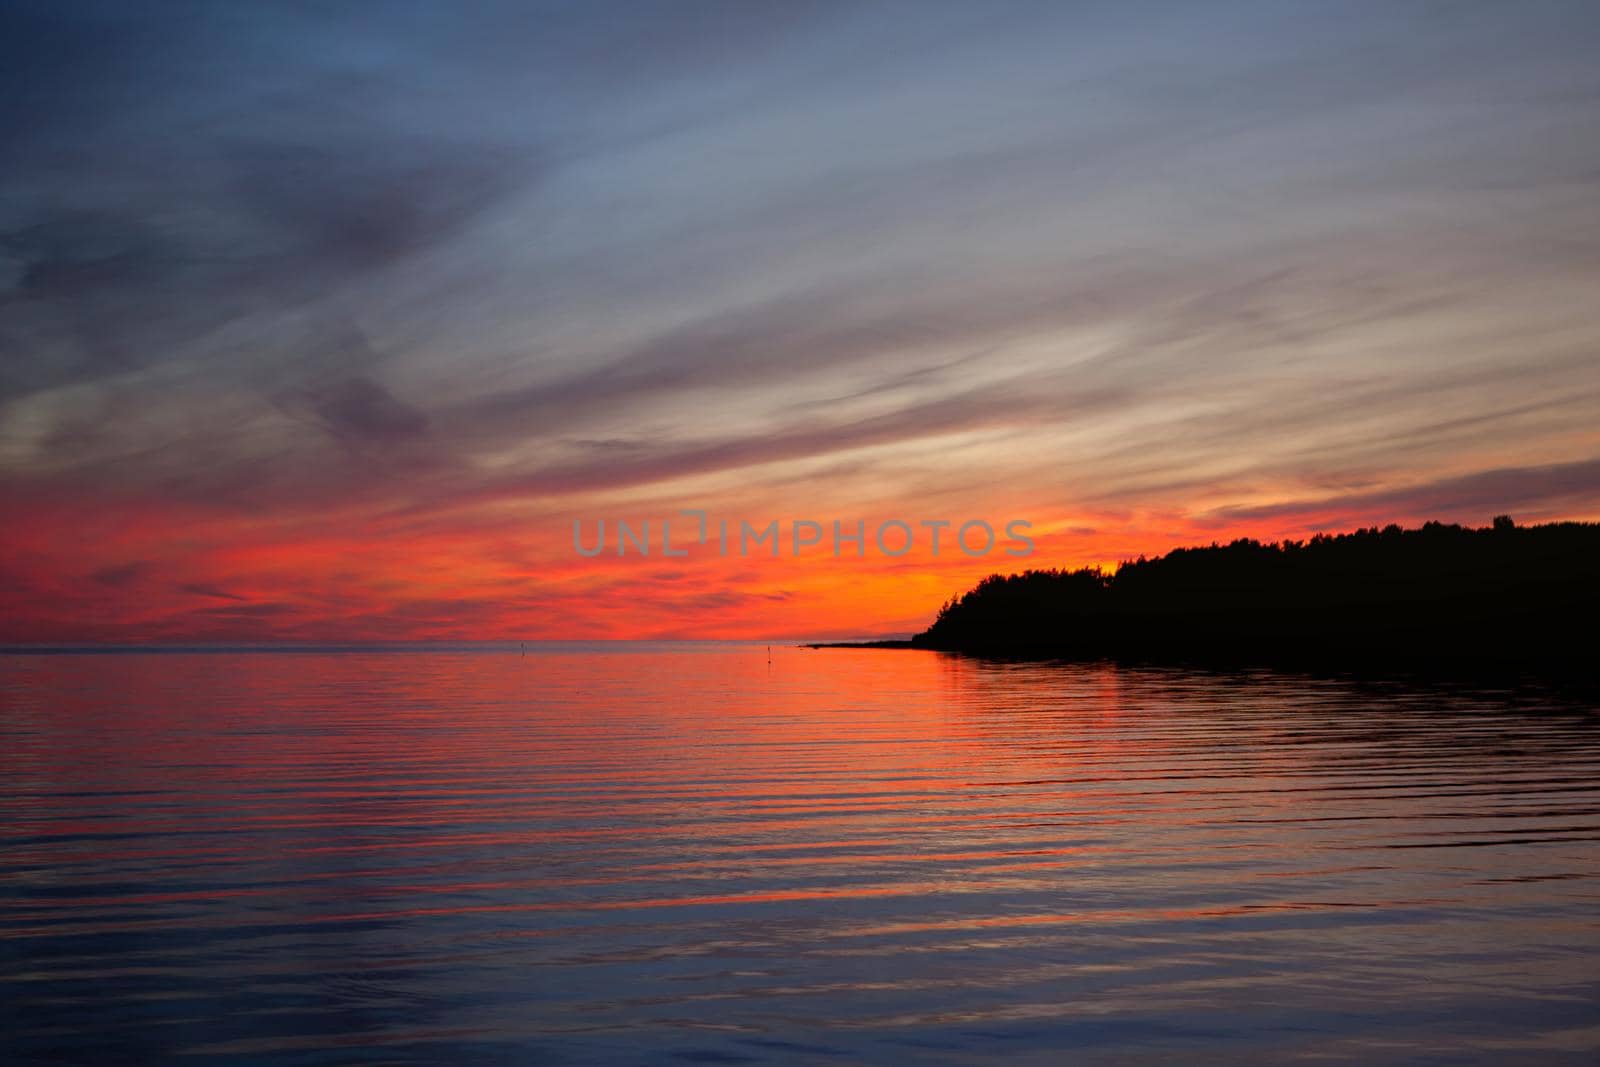 red and blue sunset on the sea - burning dramatic sky at evening in baltic sea by julija